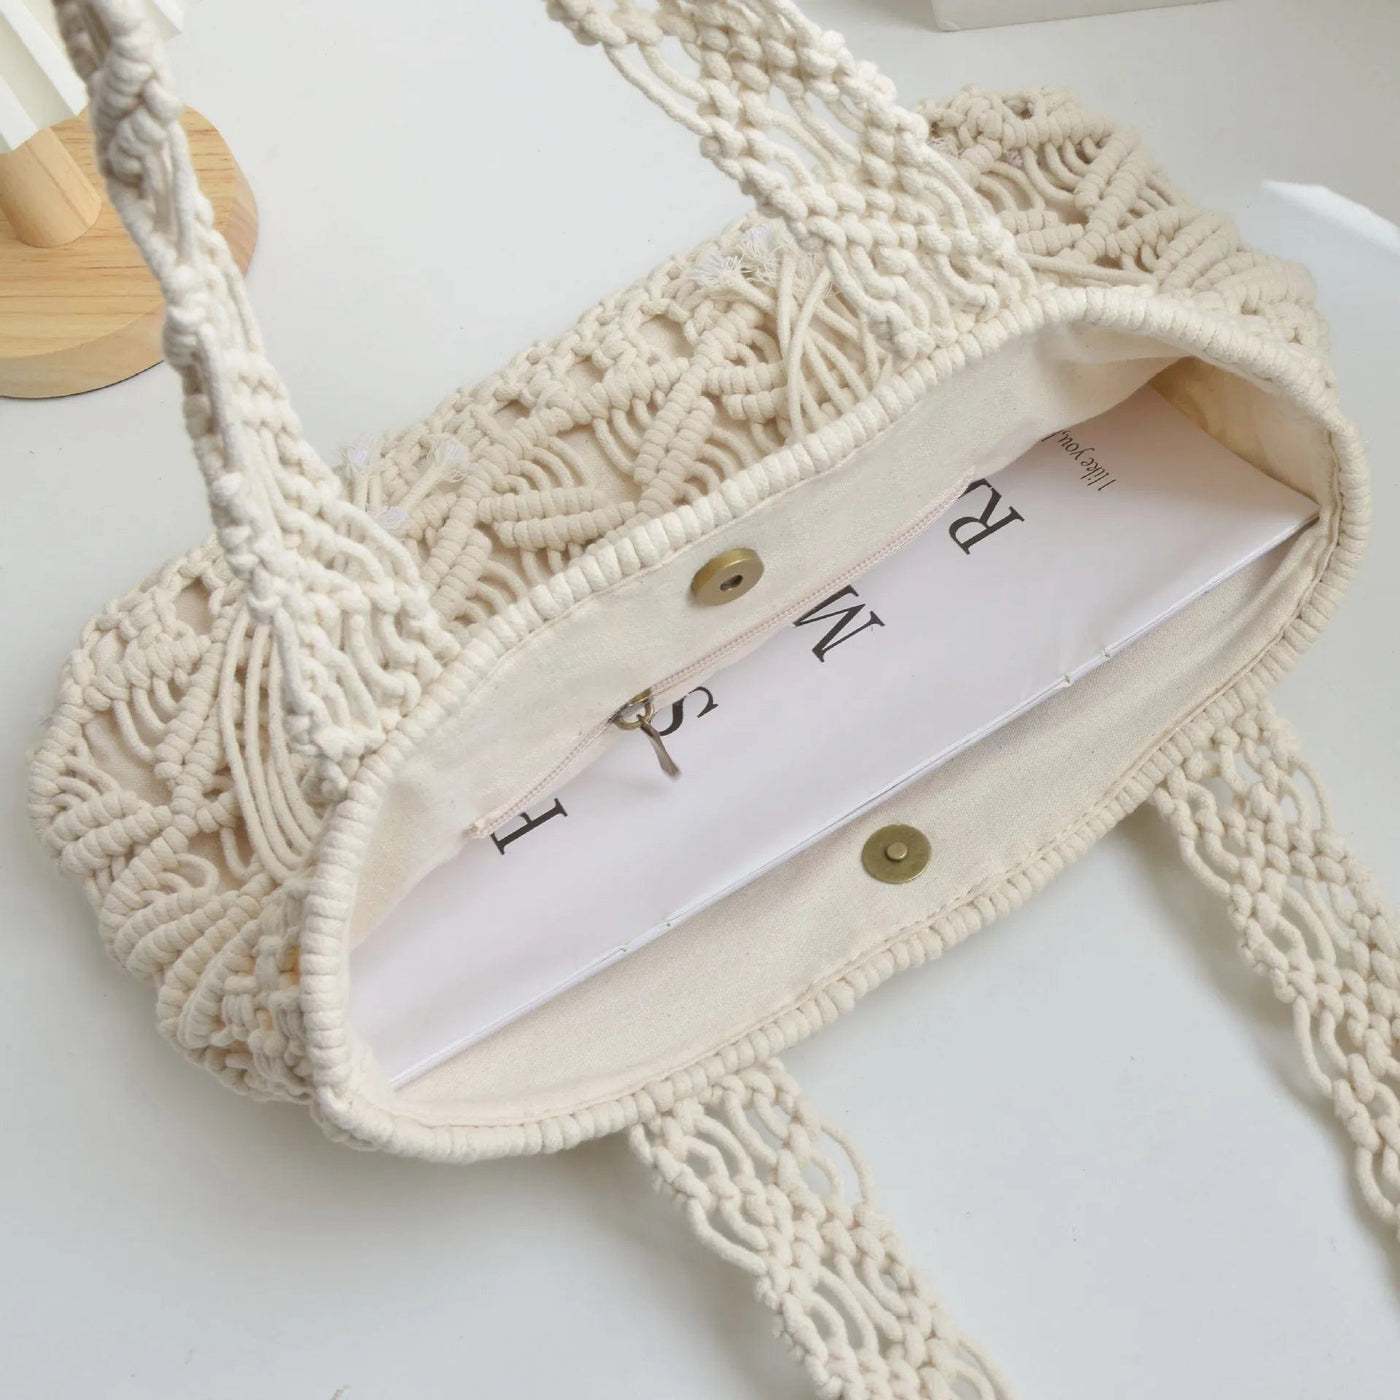 wickedafstore Creamy-white Cotton Rope Hand Woven Bag, Simple And Artistic Beach Vacation Solid Color Shoulder Bag